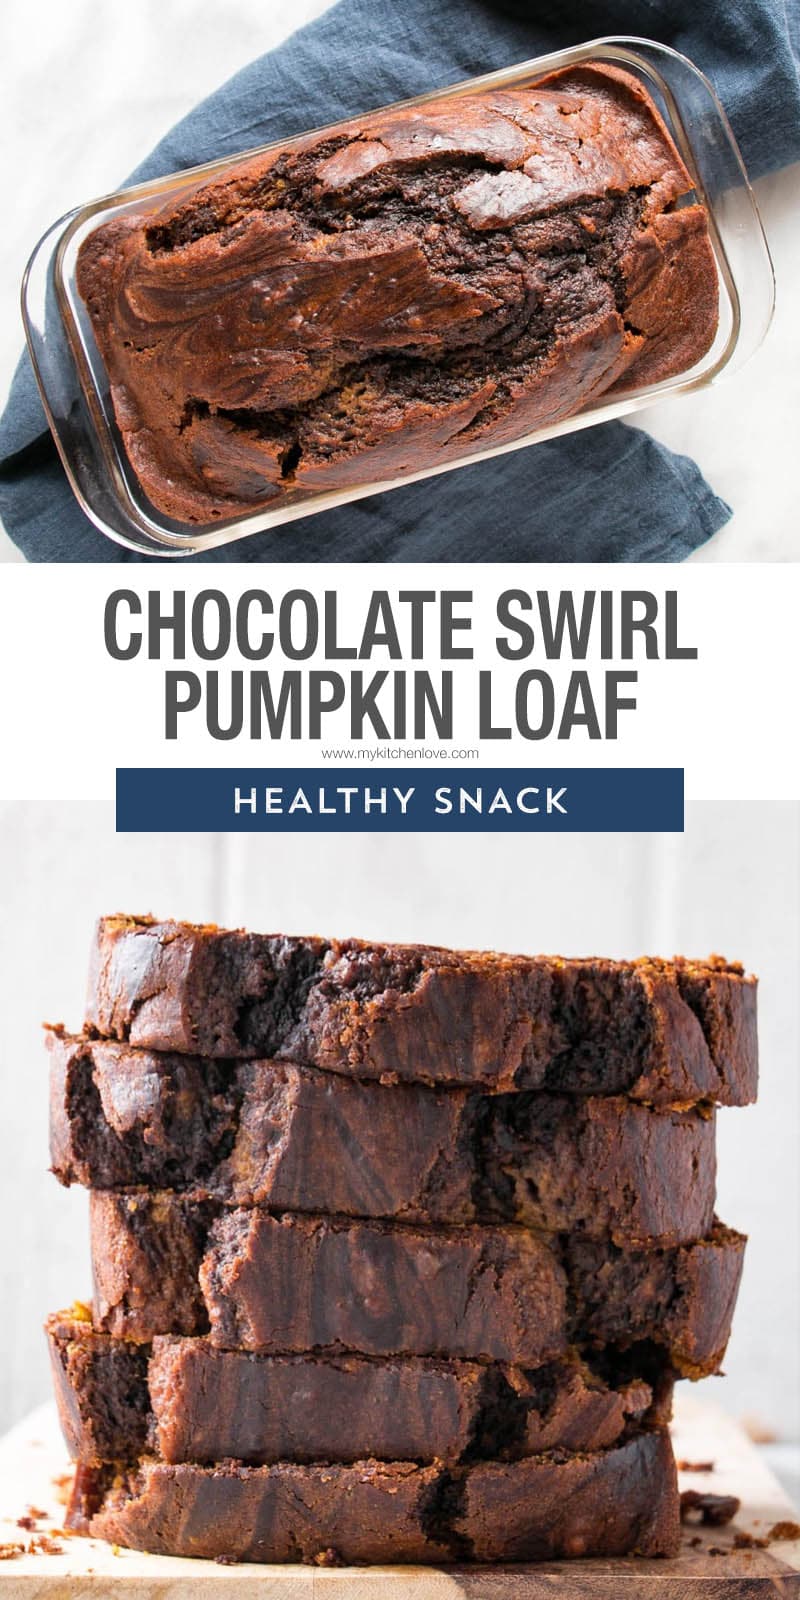 Chocolate Pumpkin Swirl Loaf and 10 more Back to School Snack ideas! Chocolate and Pumpkin together forever in this Pumpkin bread recipe. via @mykitchenlove